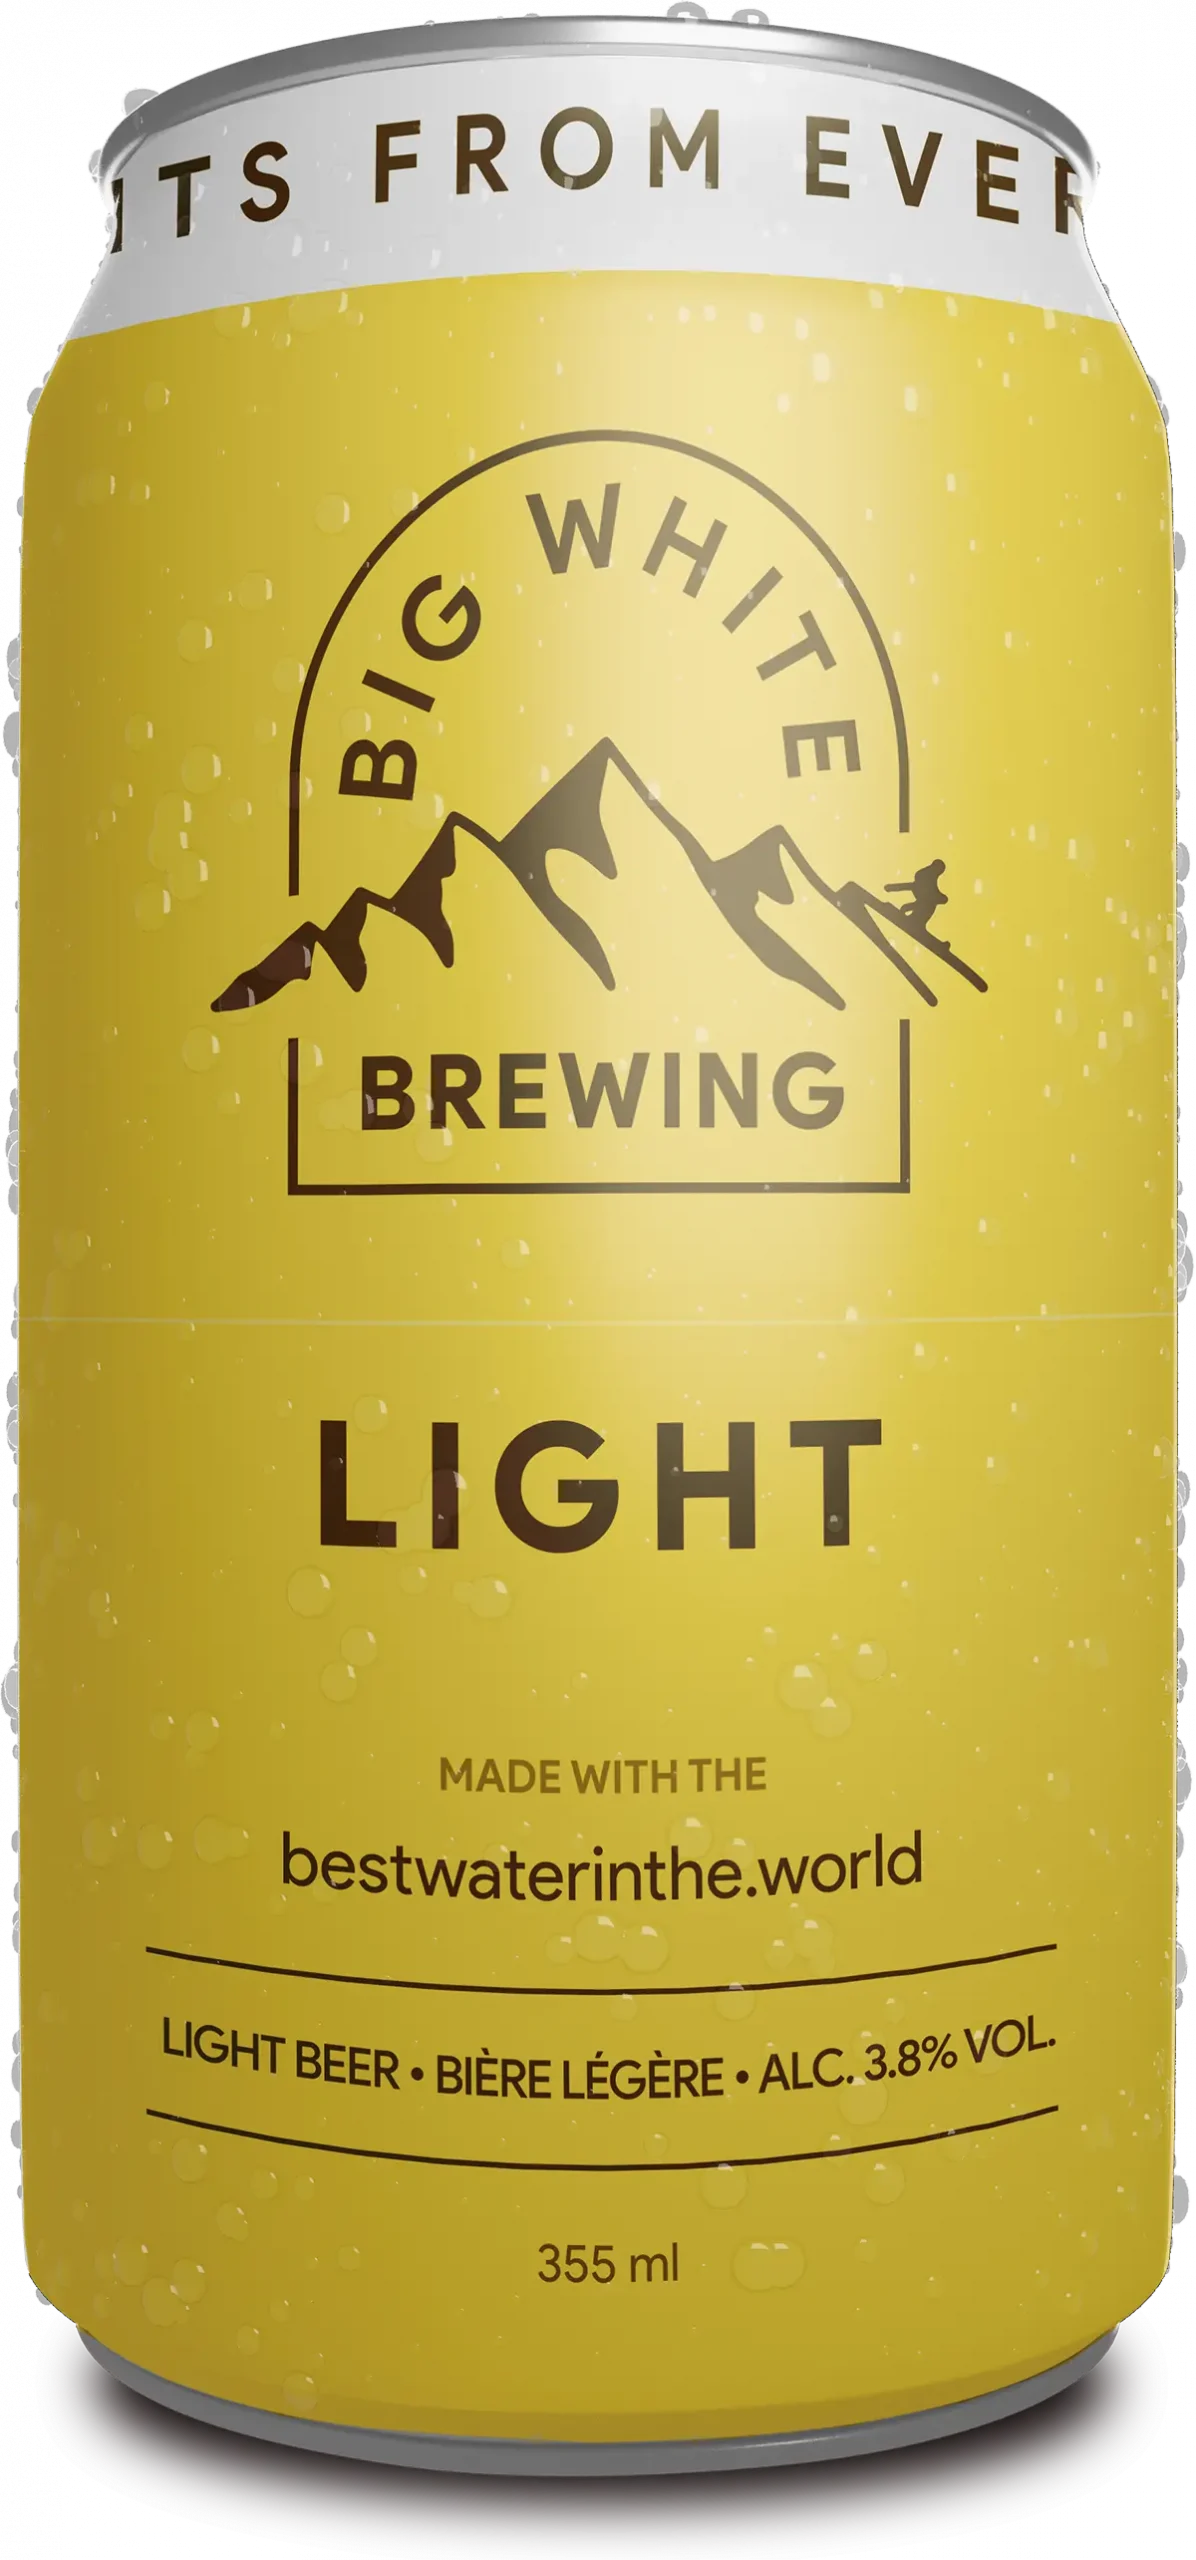 Big White Brewing Light - Made from the best water in the world